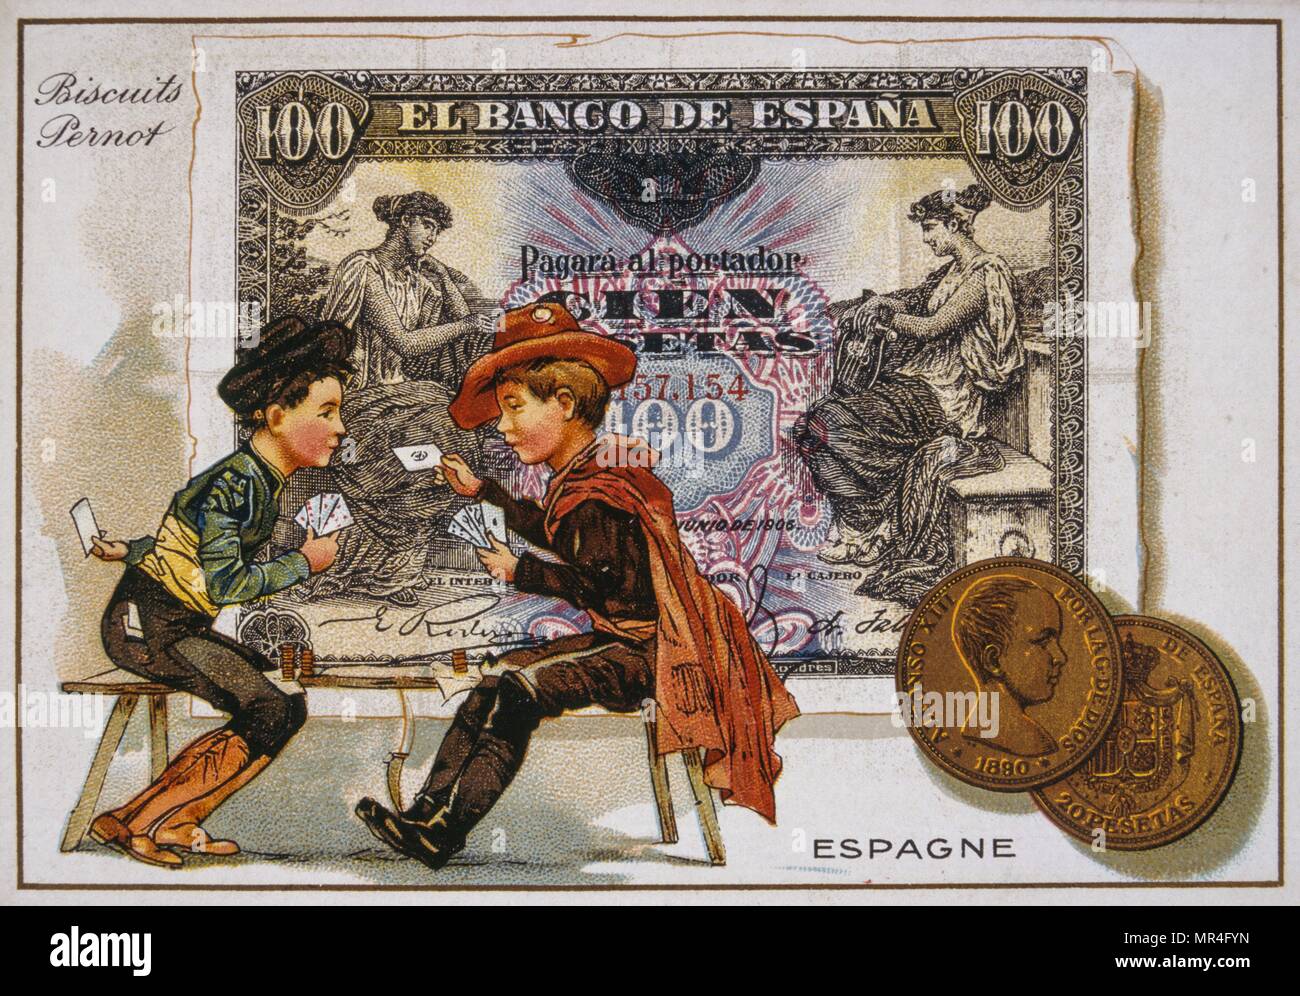 French postcard of 1900 depicting two medieval card players against a 100 Pesetas banknote Stock Photo